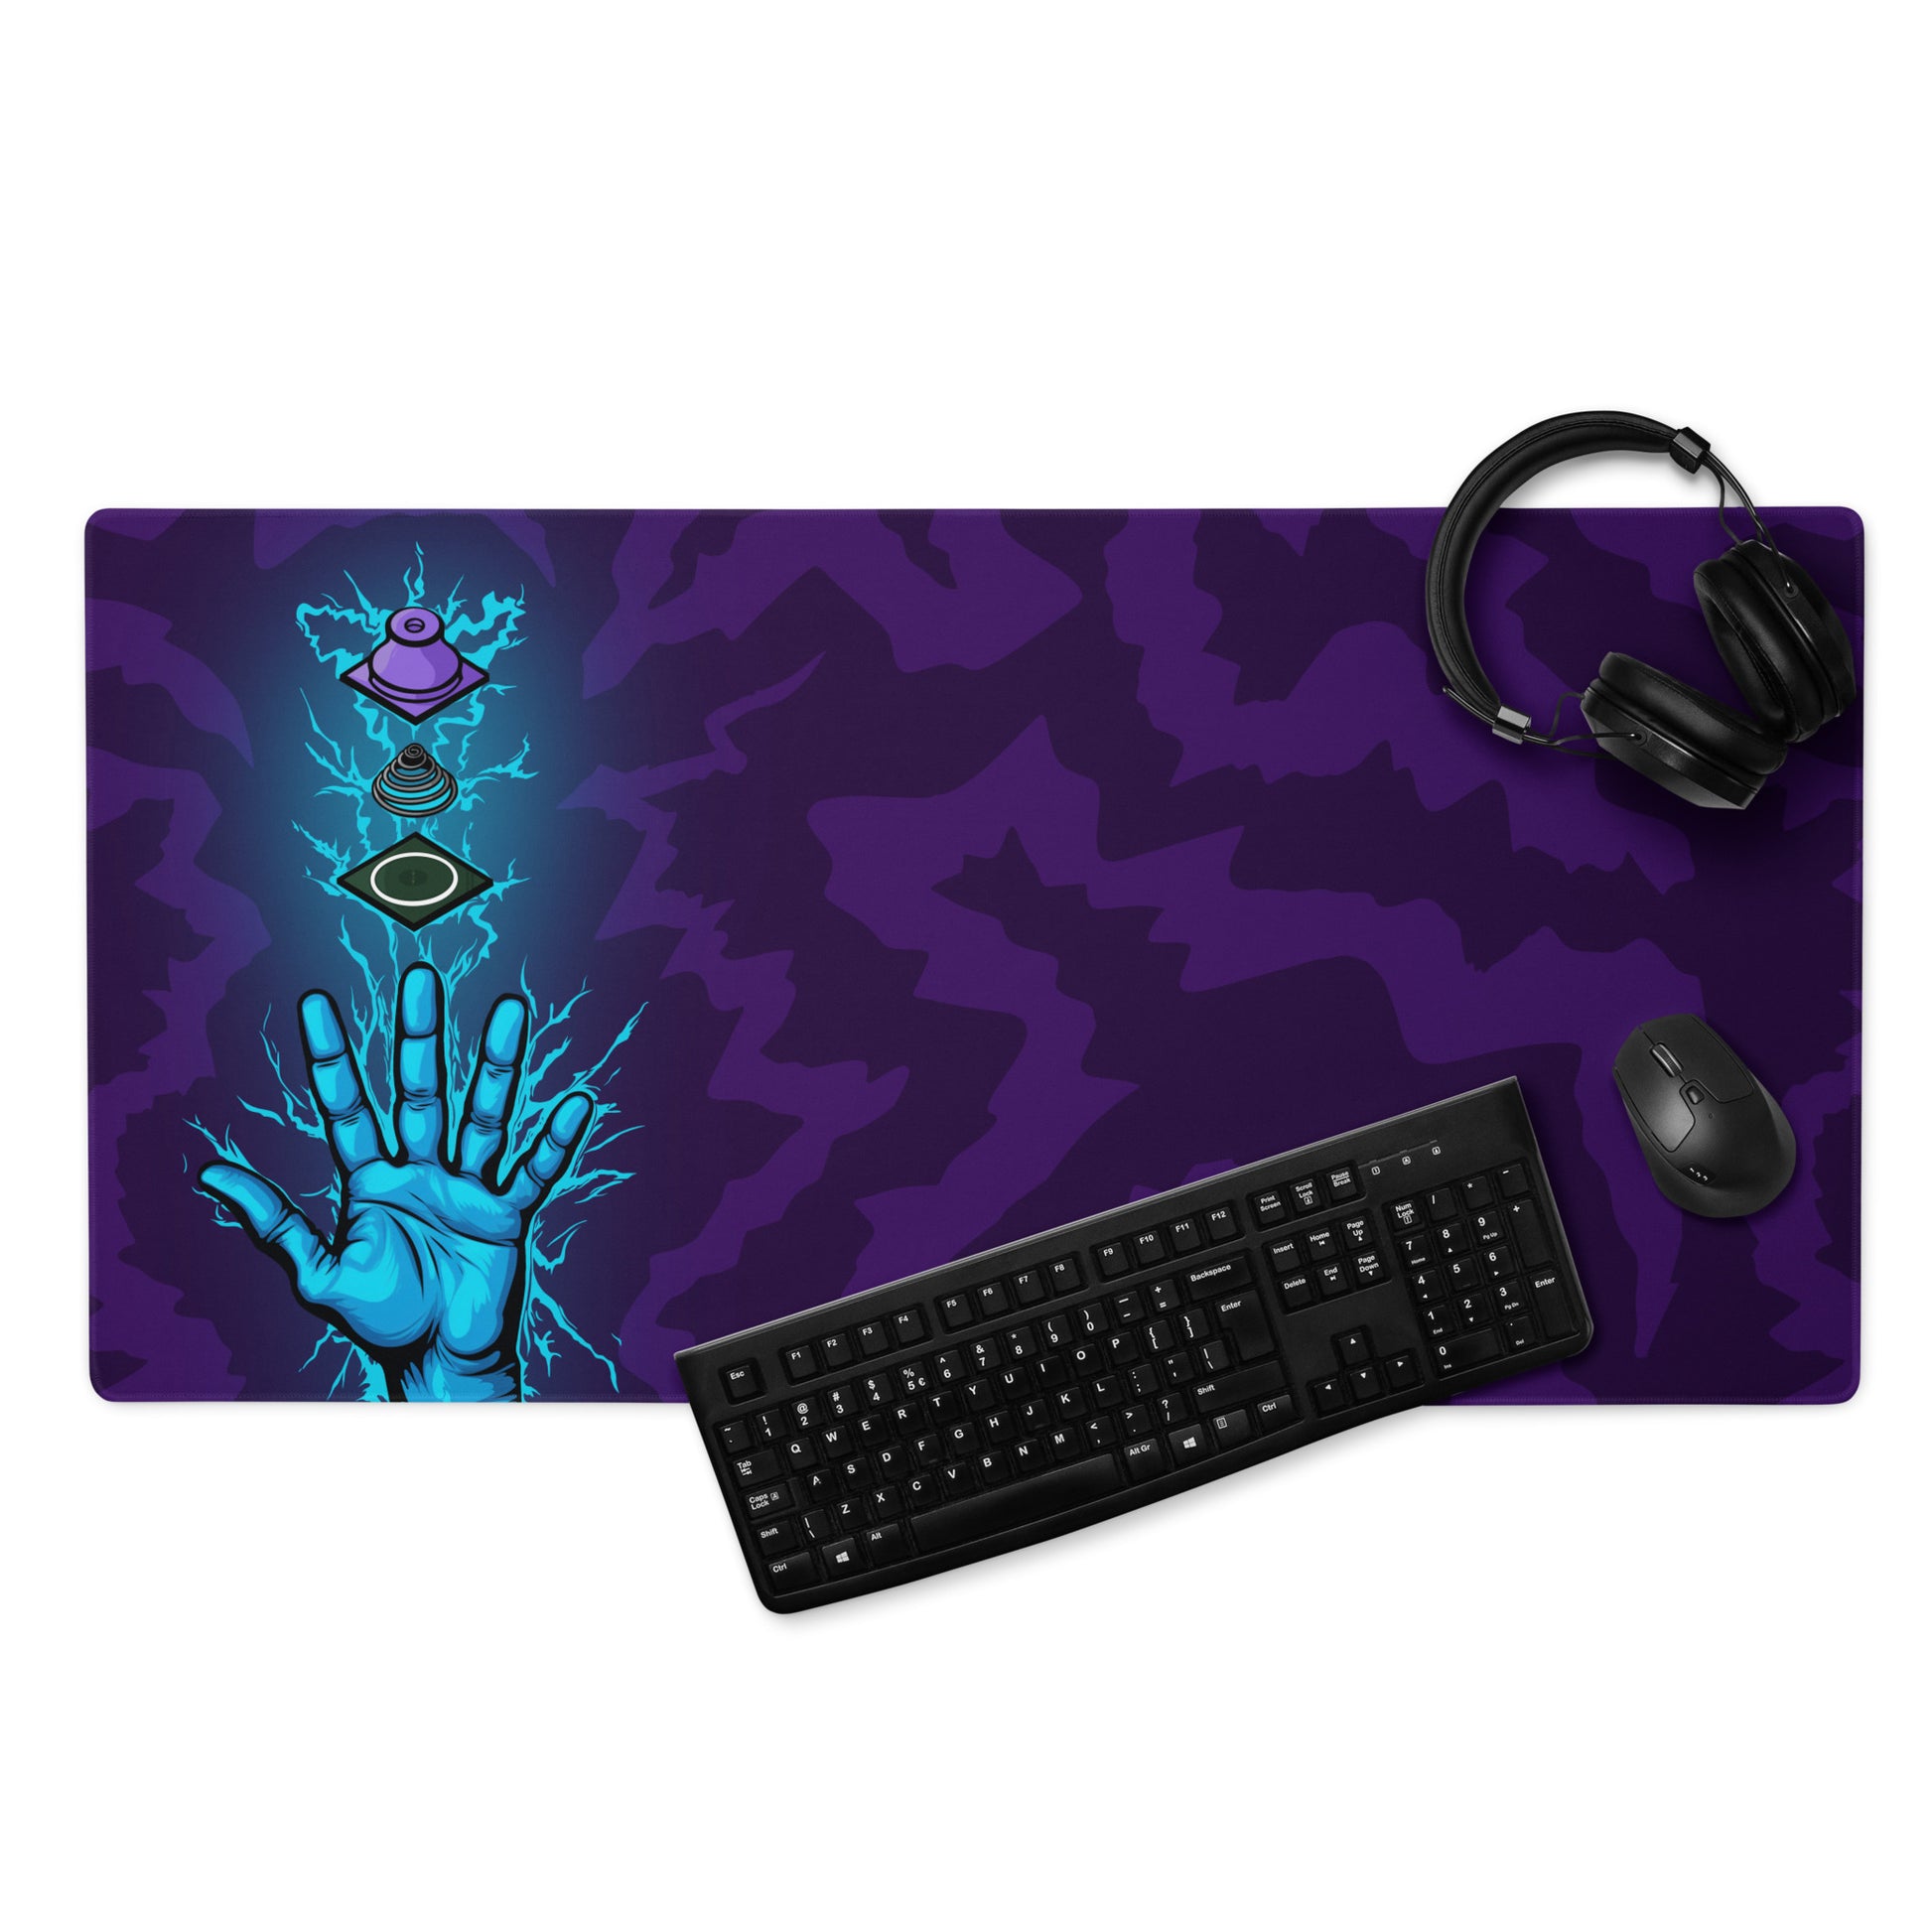 A 36" x 18" desk pad with a hand touching a broken down view of a Topre switch displayed with a keyboard, headphones and a mouse. Purple in color.